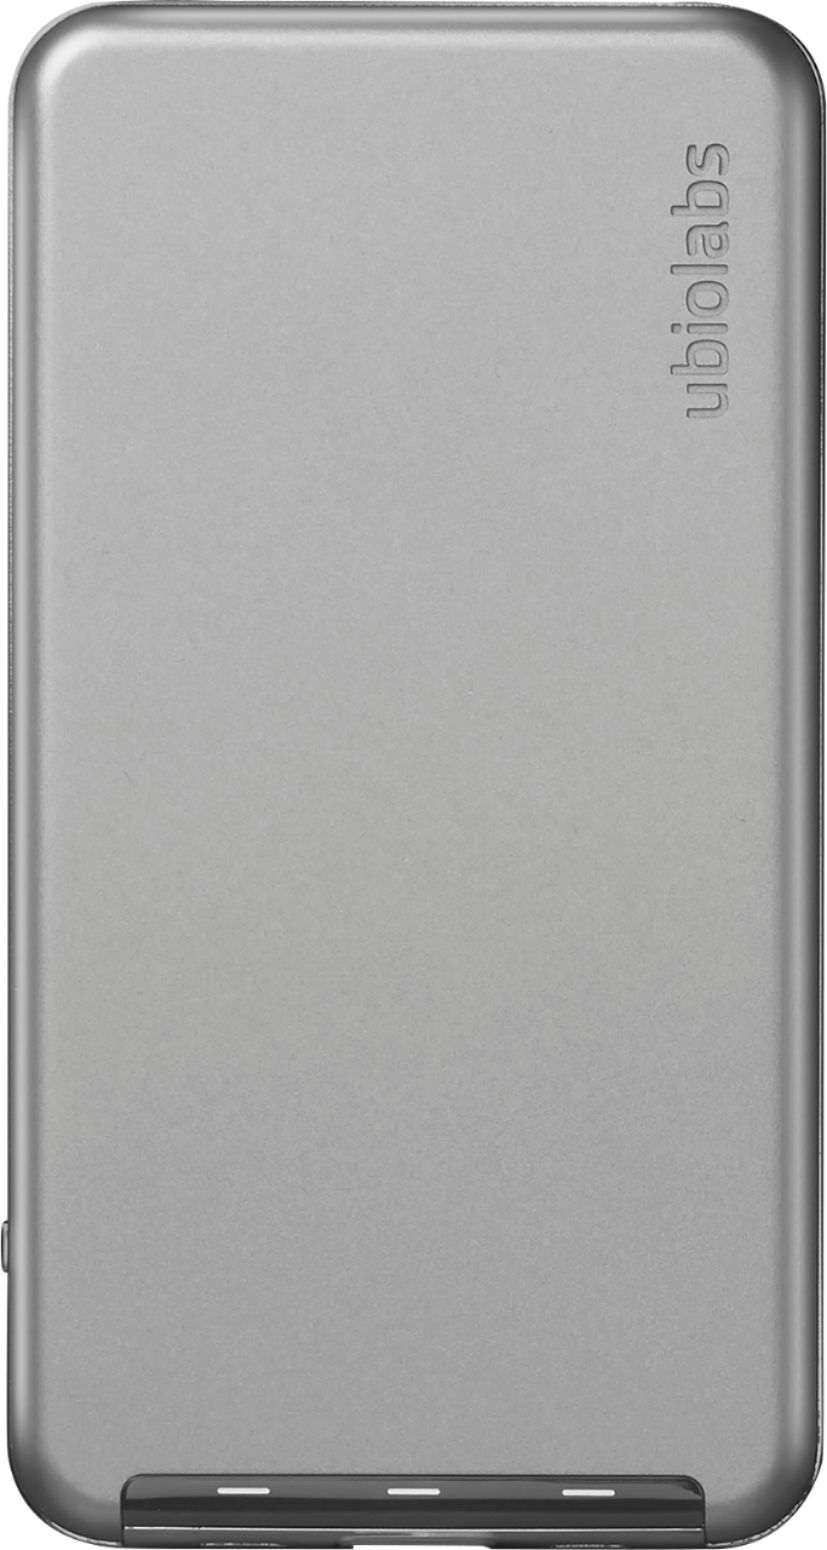 Ubio Labs Power15 Apple Certified Portable Charger with Lightning Input  Gray 51309BBR - Best Buy